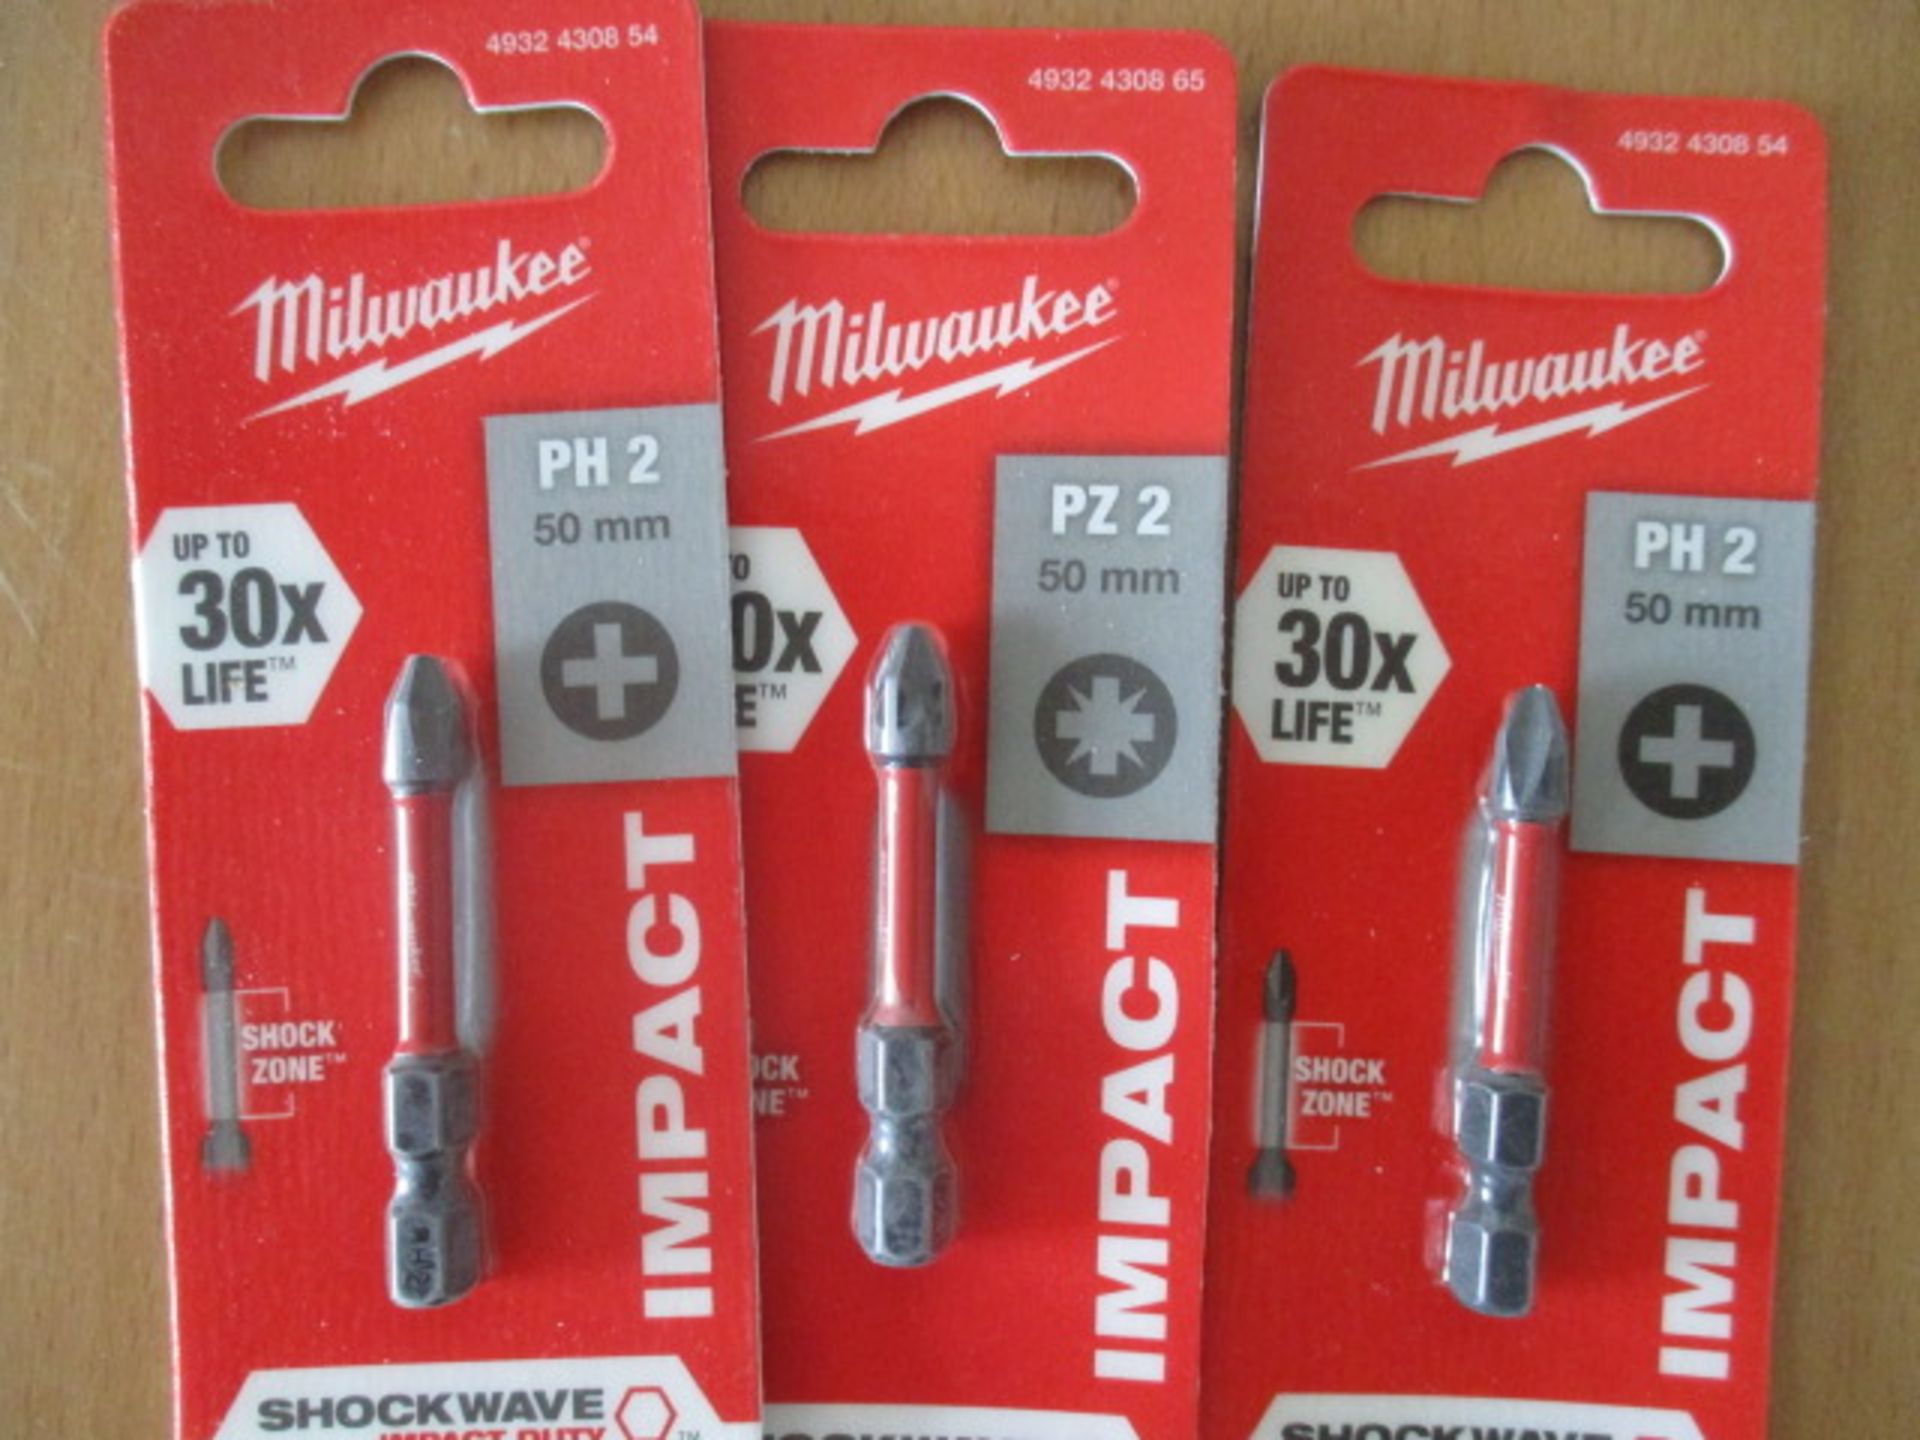 3pcs in pack Milwaukee premium drill bits as pictured.